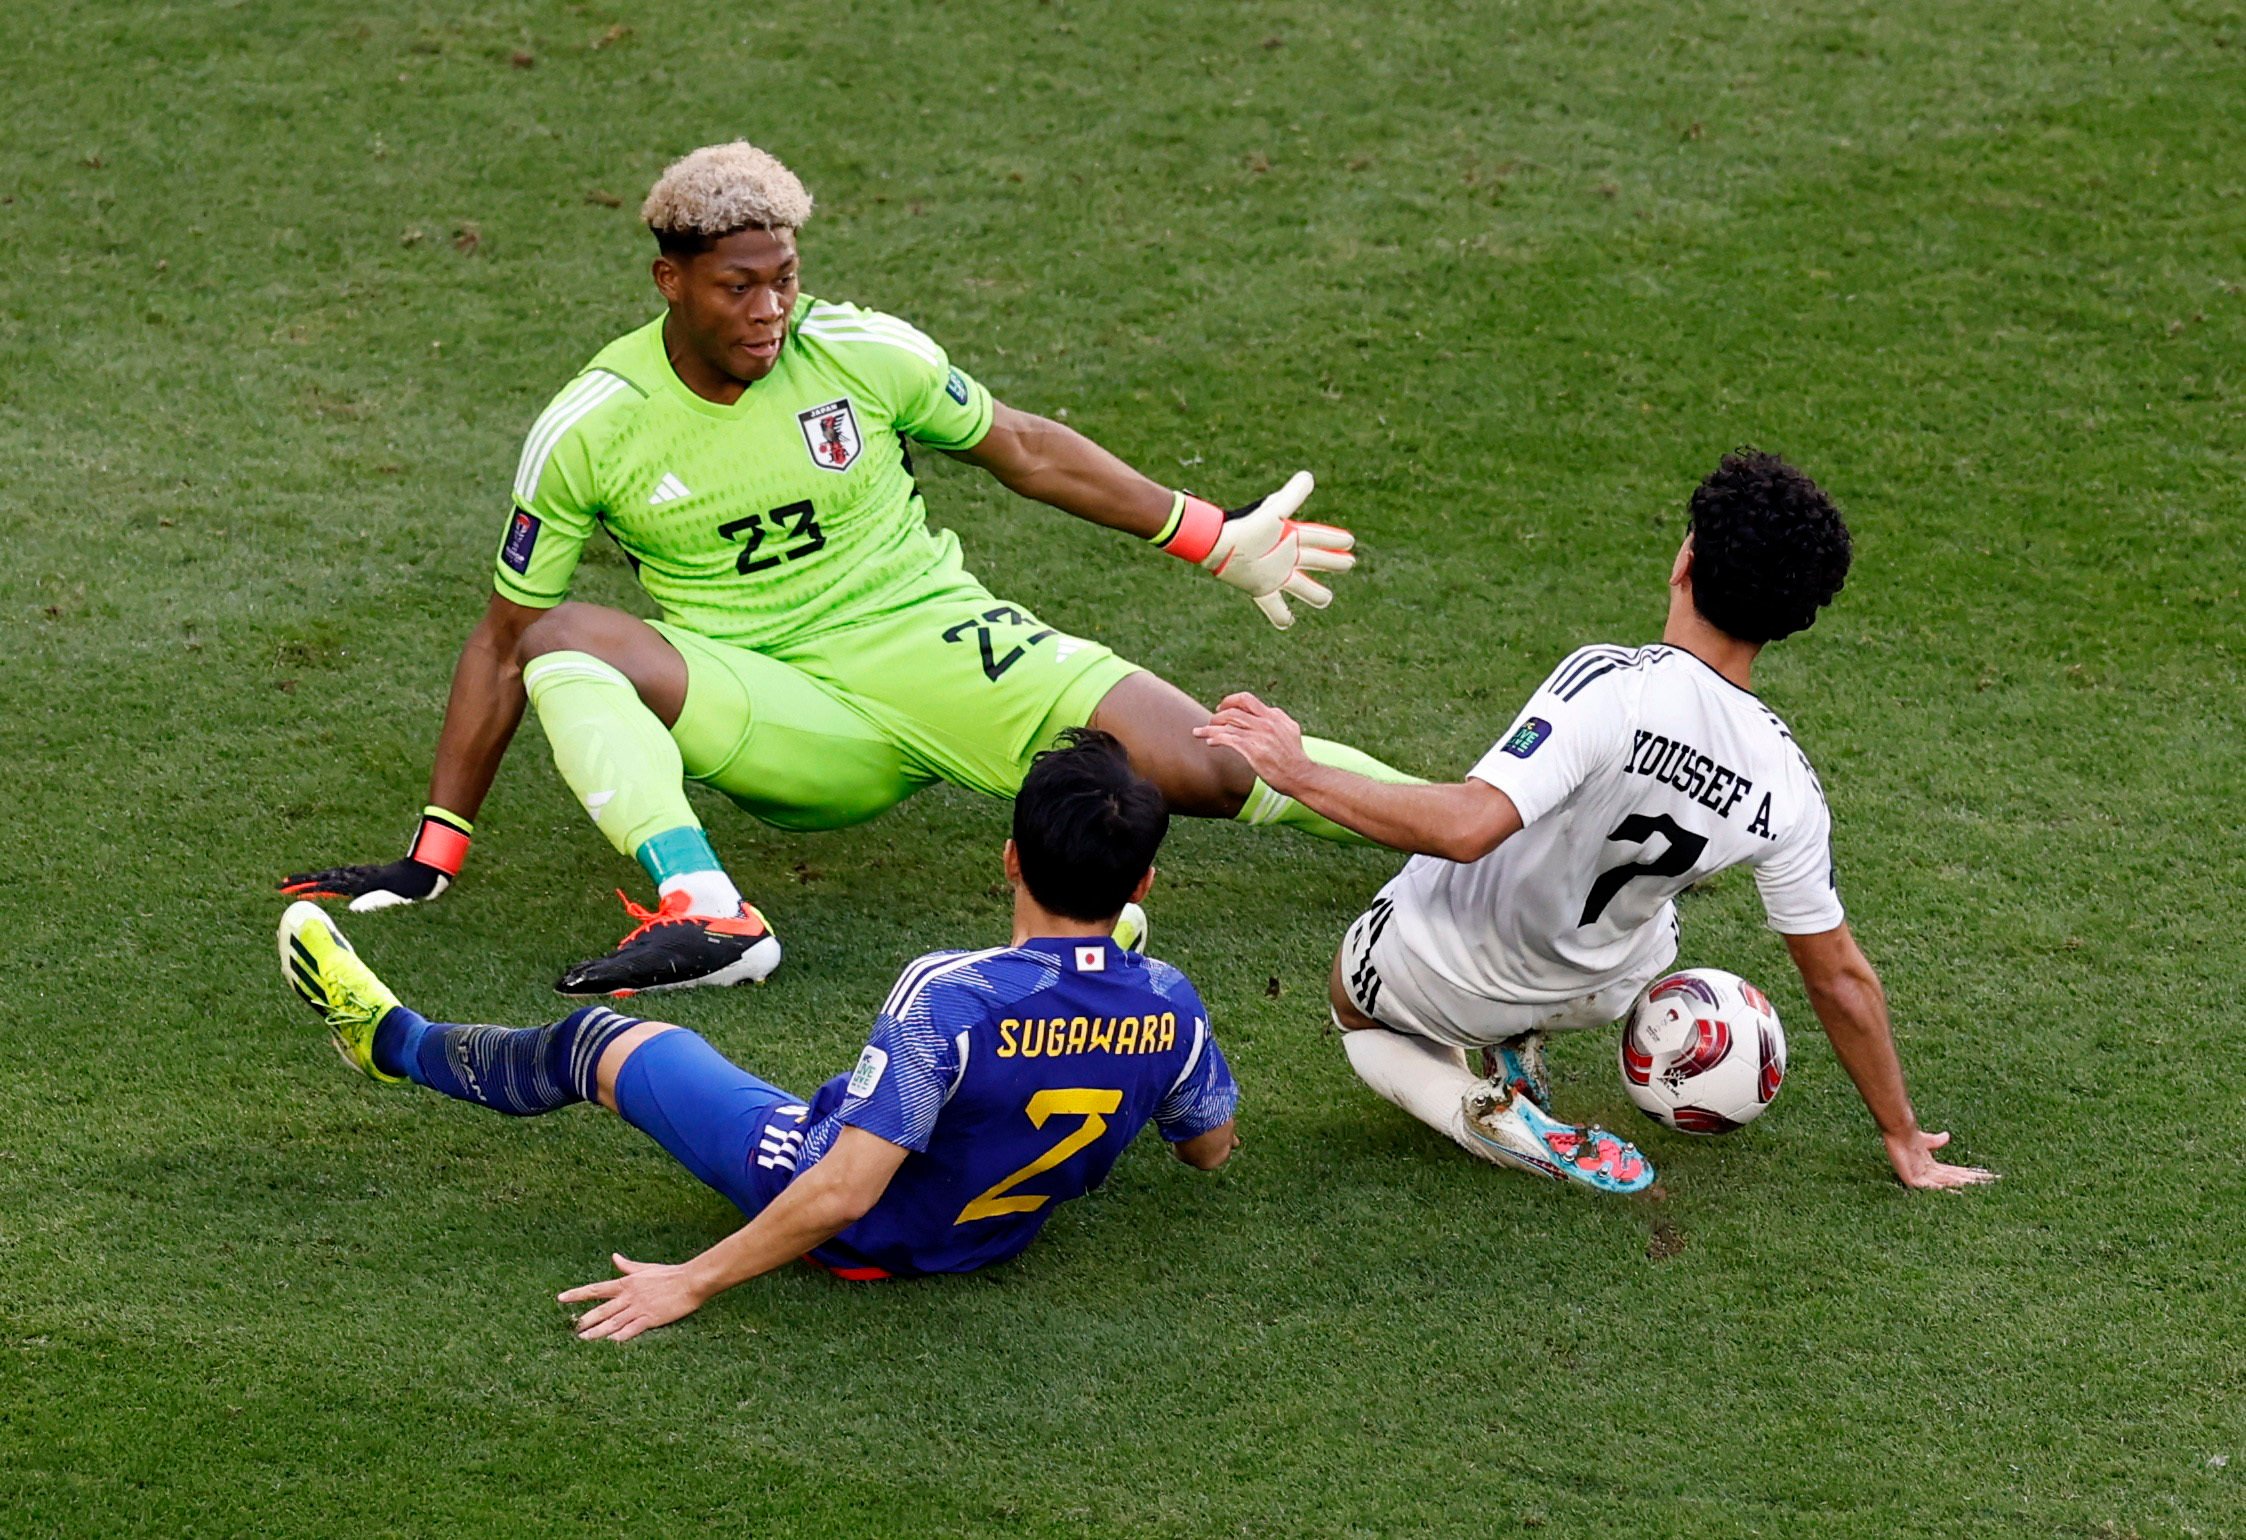 Goalkeeper Zion Suzuki was subjected to racist abuse on social media following Japan’s defeat by Iraq. Photo: Reuters